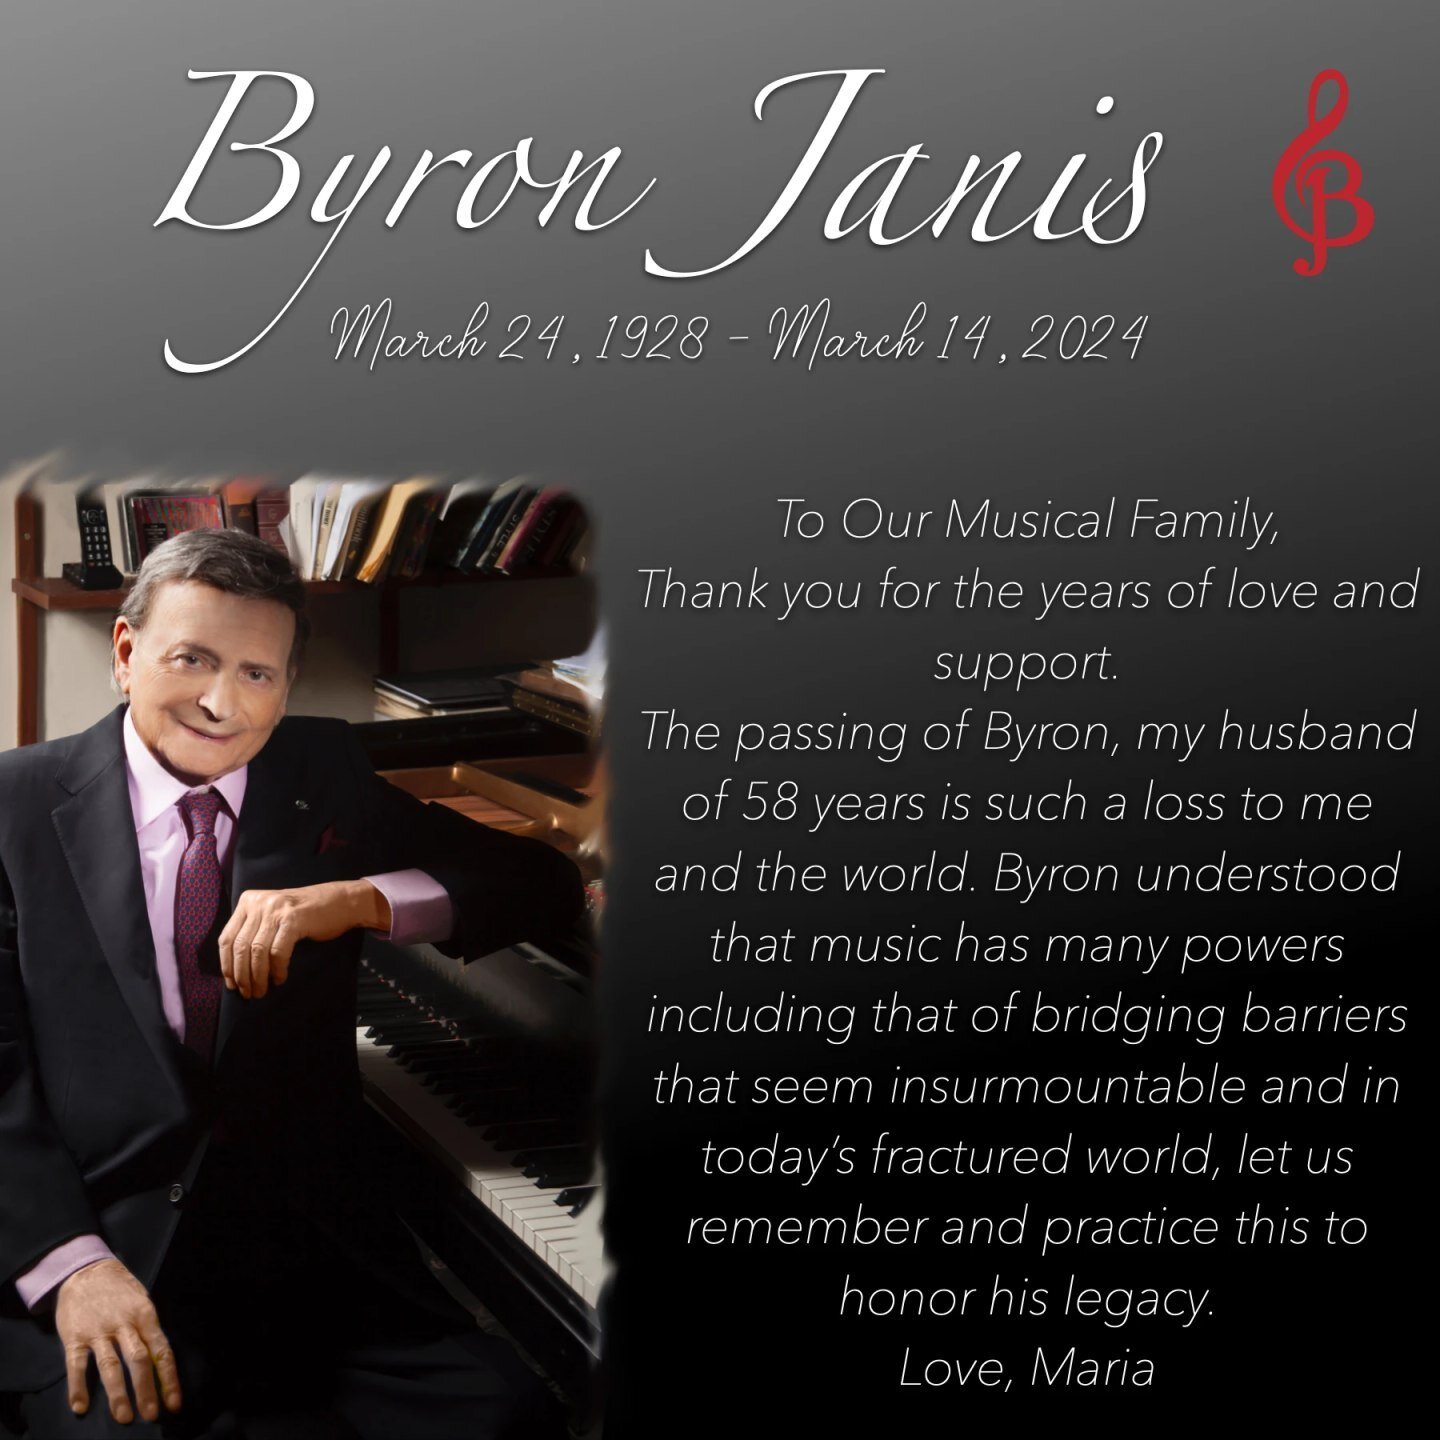 To Our Musical Family, 

Thank you for the years of love and support. 
The passing of Byron, my husband of 58 years is such a loss to me and the world. Byron understood that music has many powers including that of bridging barriers that seem insurmou